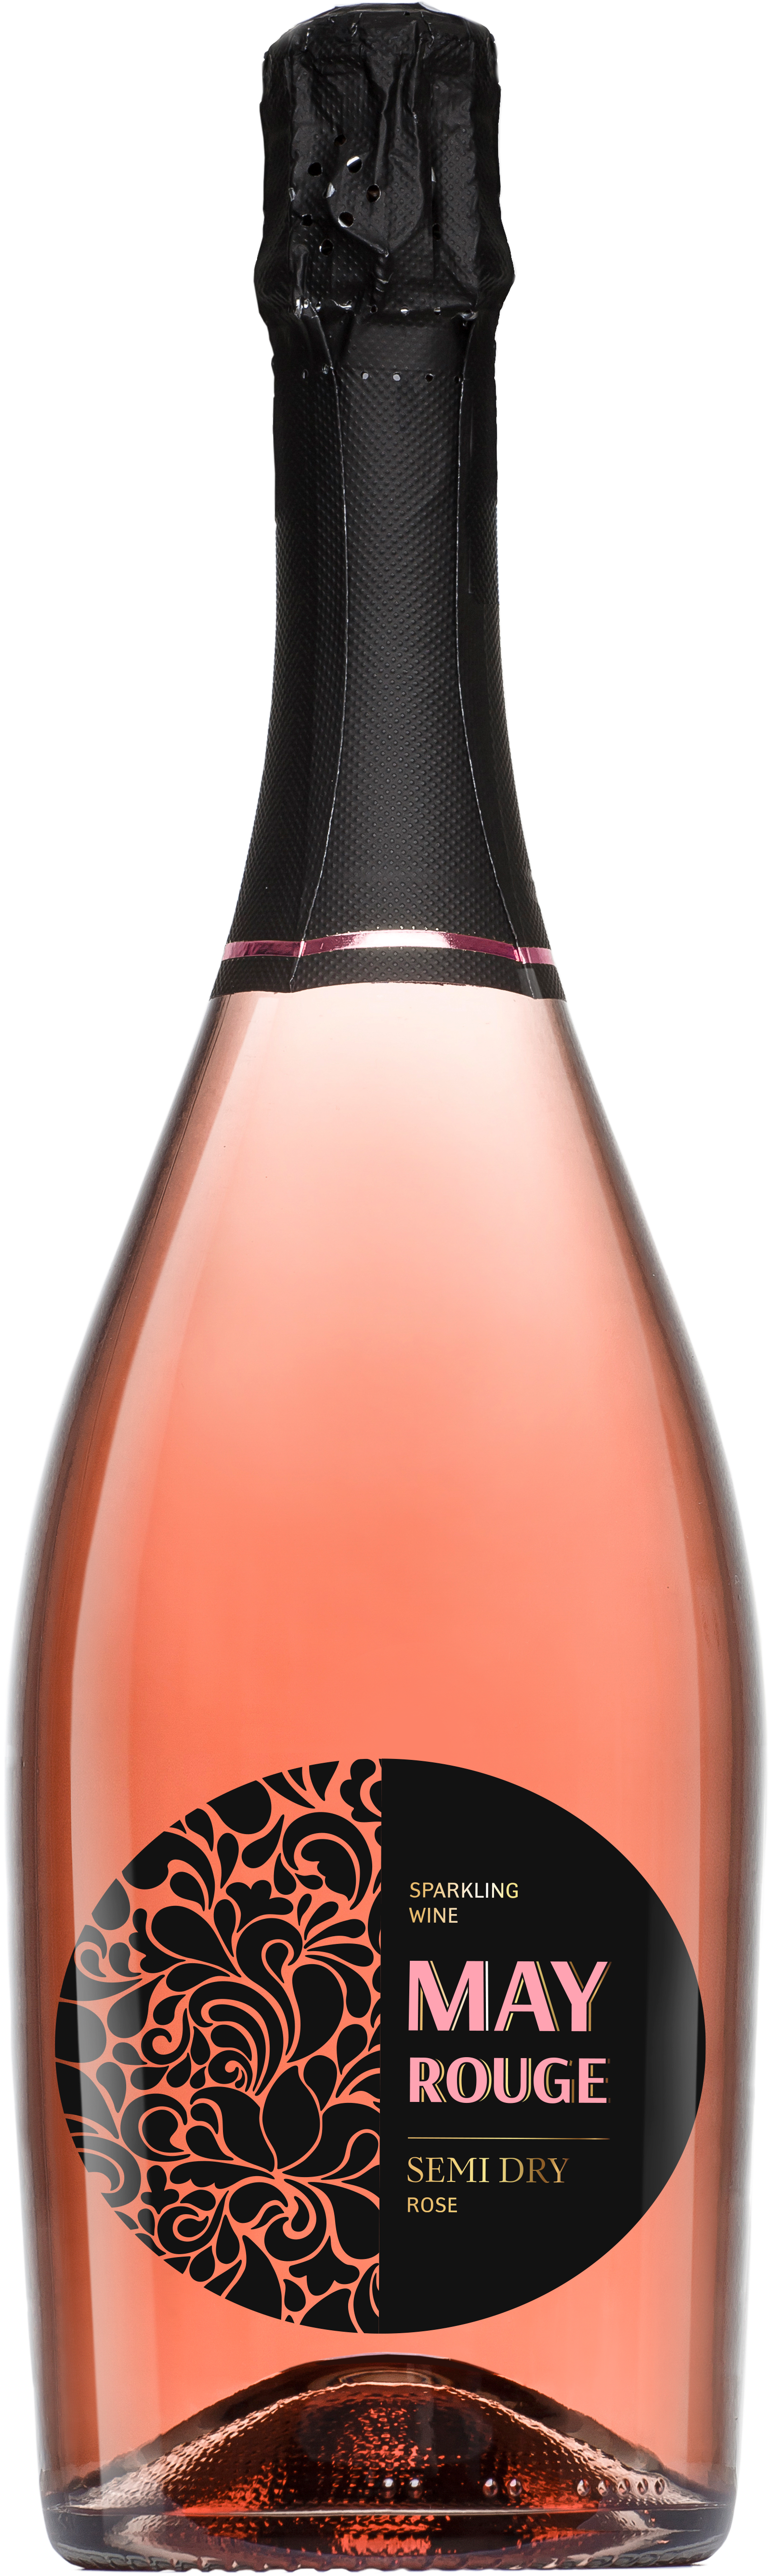 Rose sparkling wine “May Rouge”